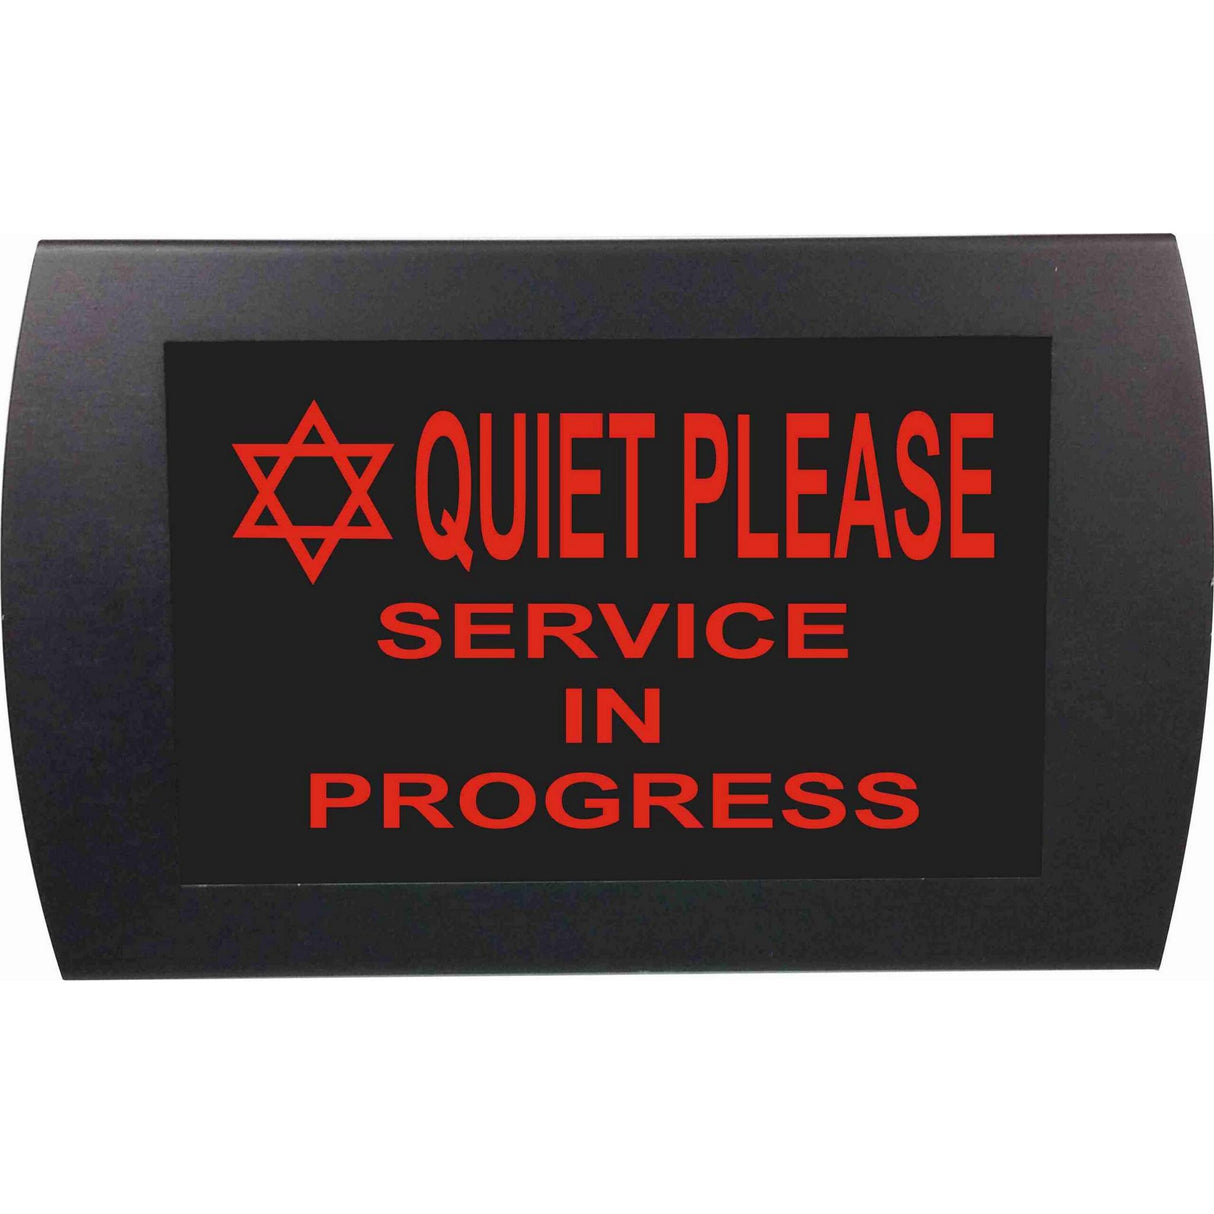 American Recorder OAS-2026M-RD "QUIET PLEASE SERVICE IN PROGRESS WITH STAR OF DAVID" LED Lighted Sign, Red